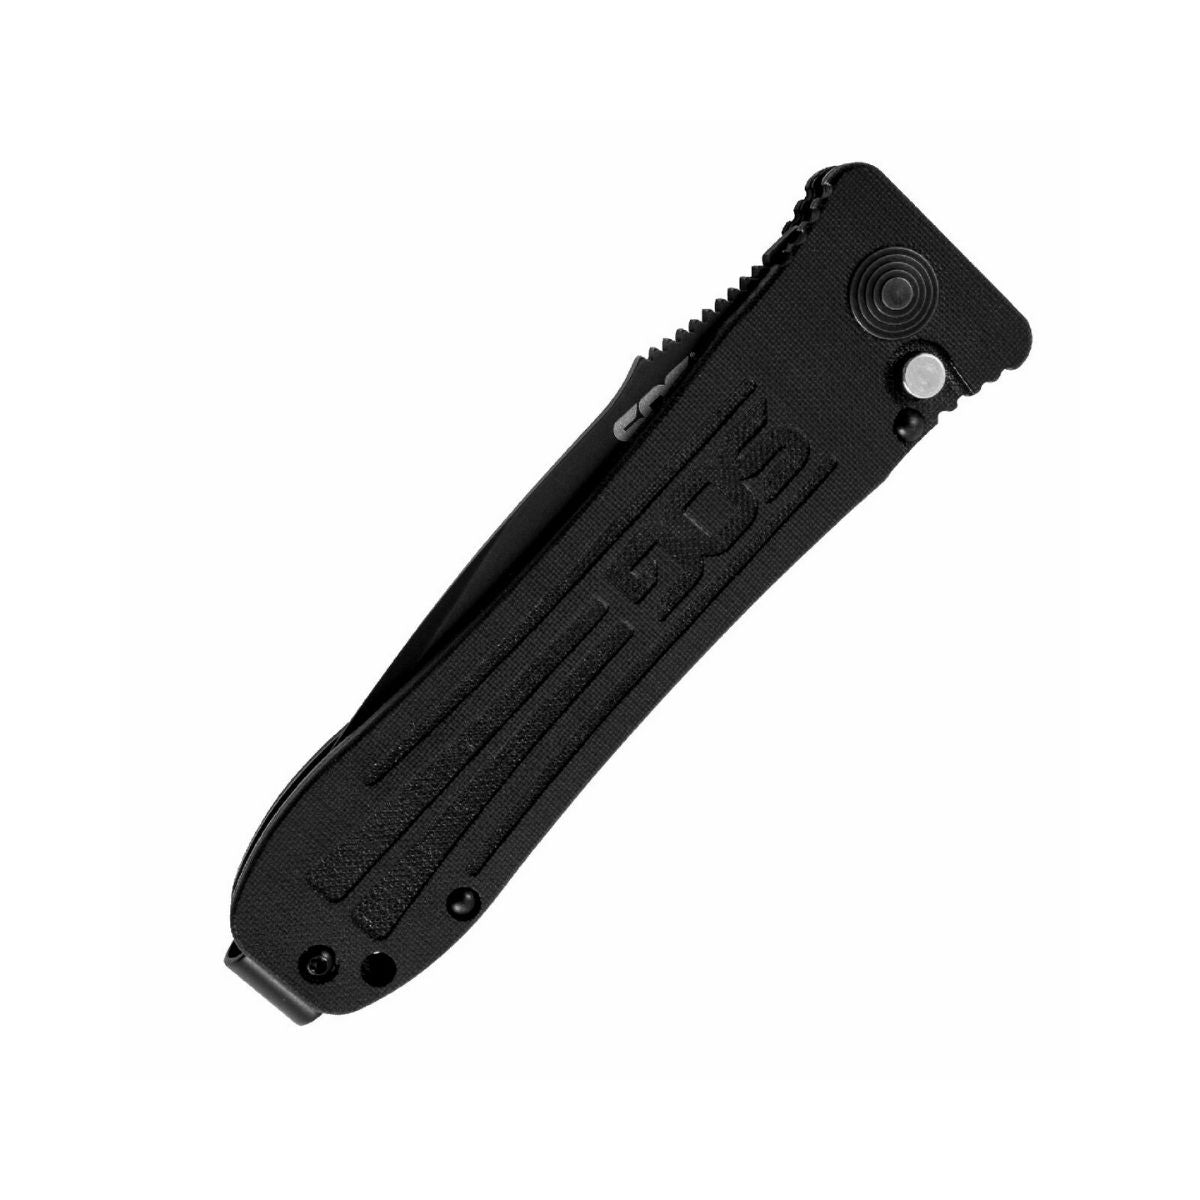 SOG Strat OPS Auto Knife - SO1001-BX - Outdoor Travel Gear 2